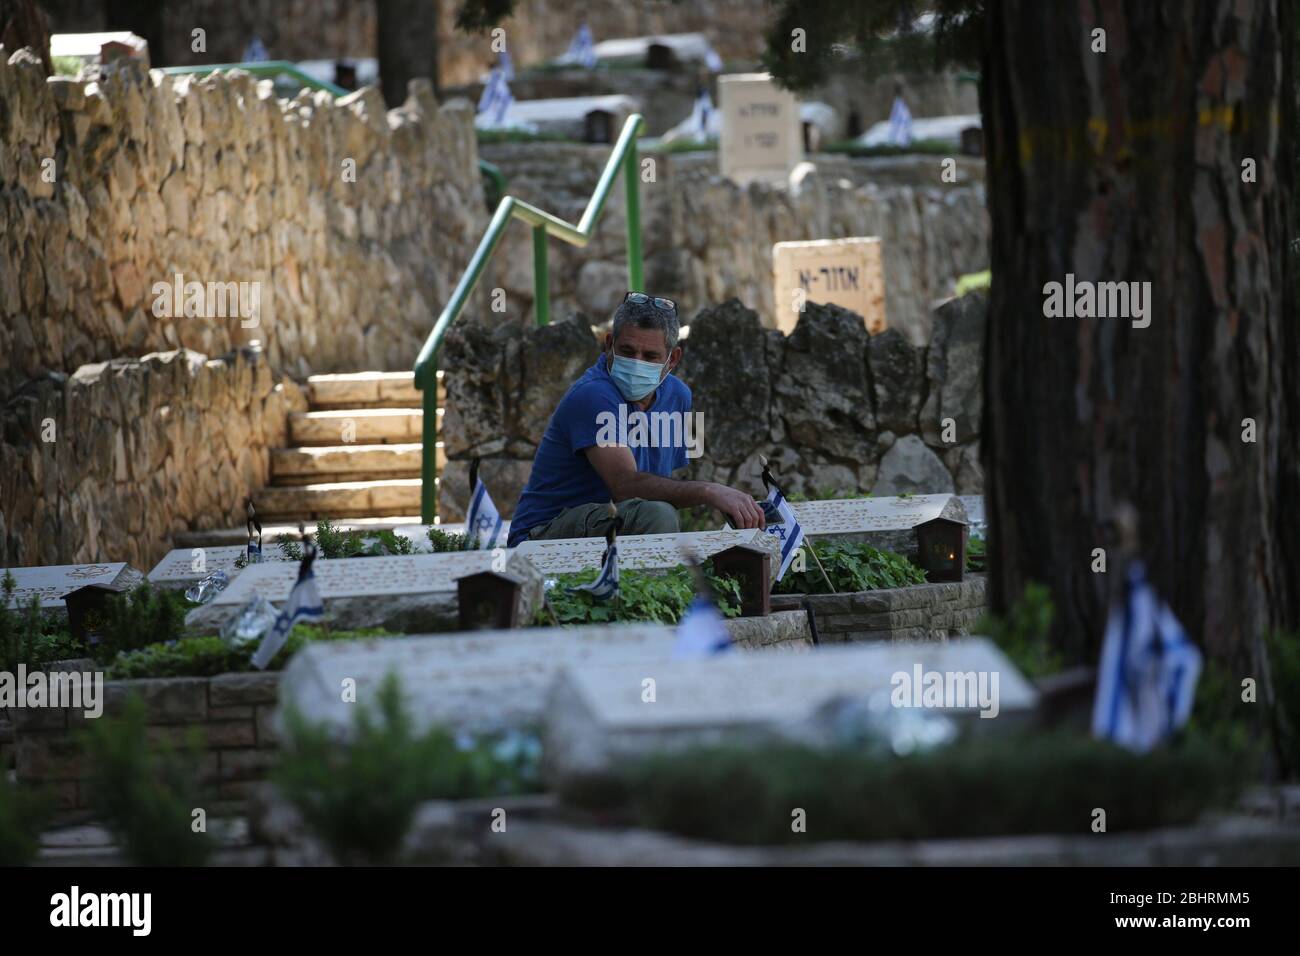 Jerusalem. 27th Apr, 2020. A man wearing protective mask commemorates Israeli fallen soldiers in a military cemetery in Jerusalem on April 27, 2020. Credit: Muammar Awad/Xinhua/Alamy Live News Stock Photo